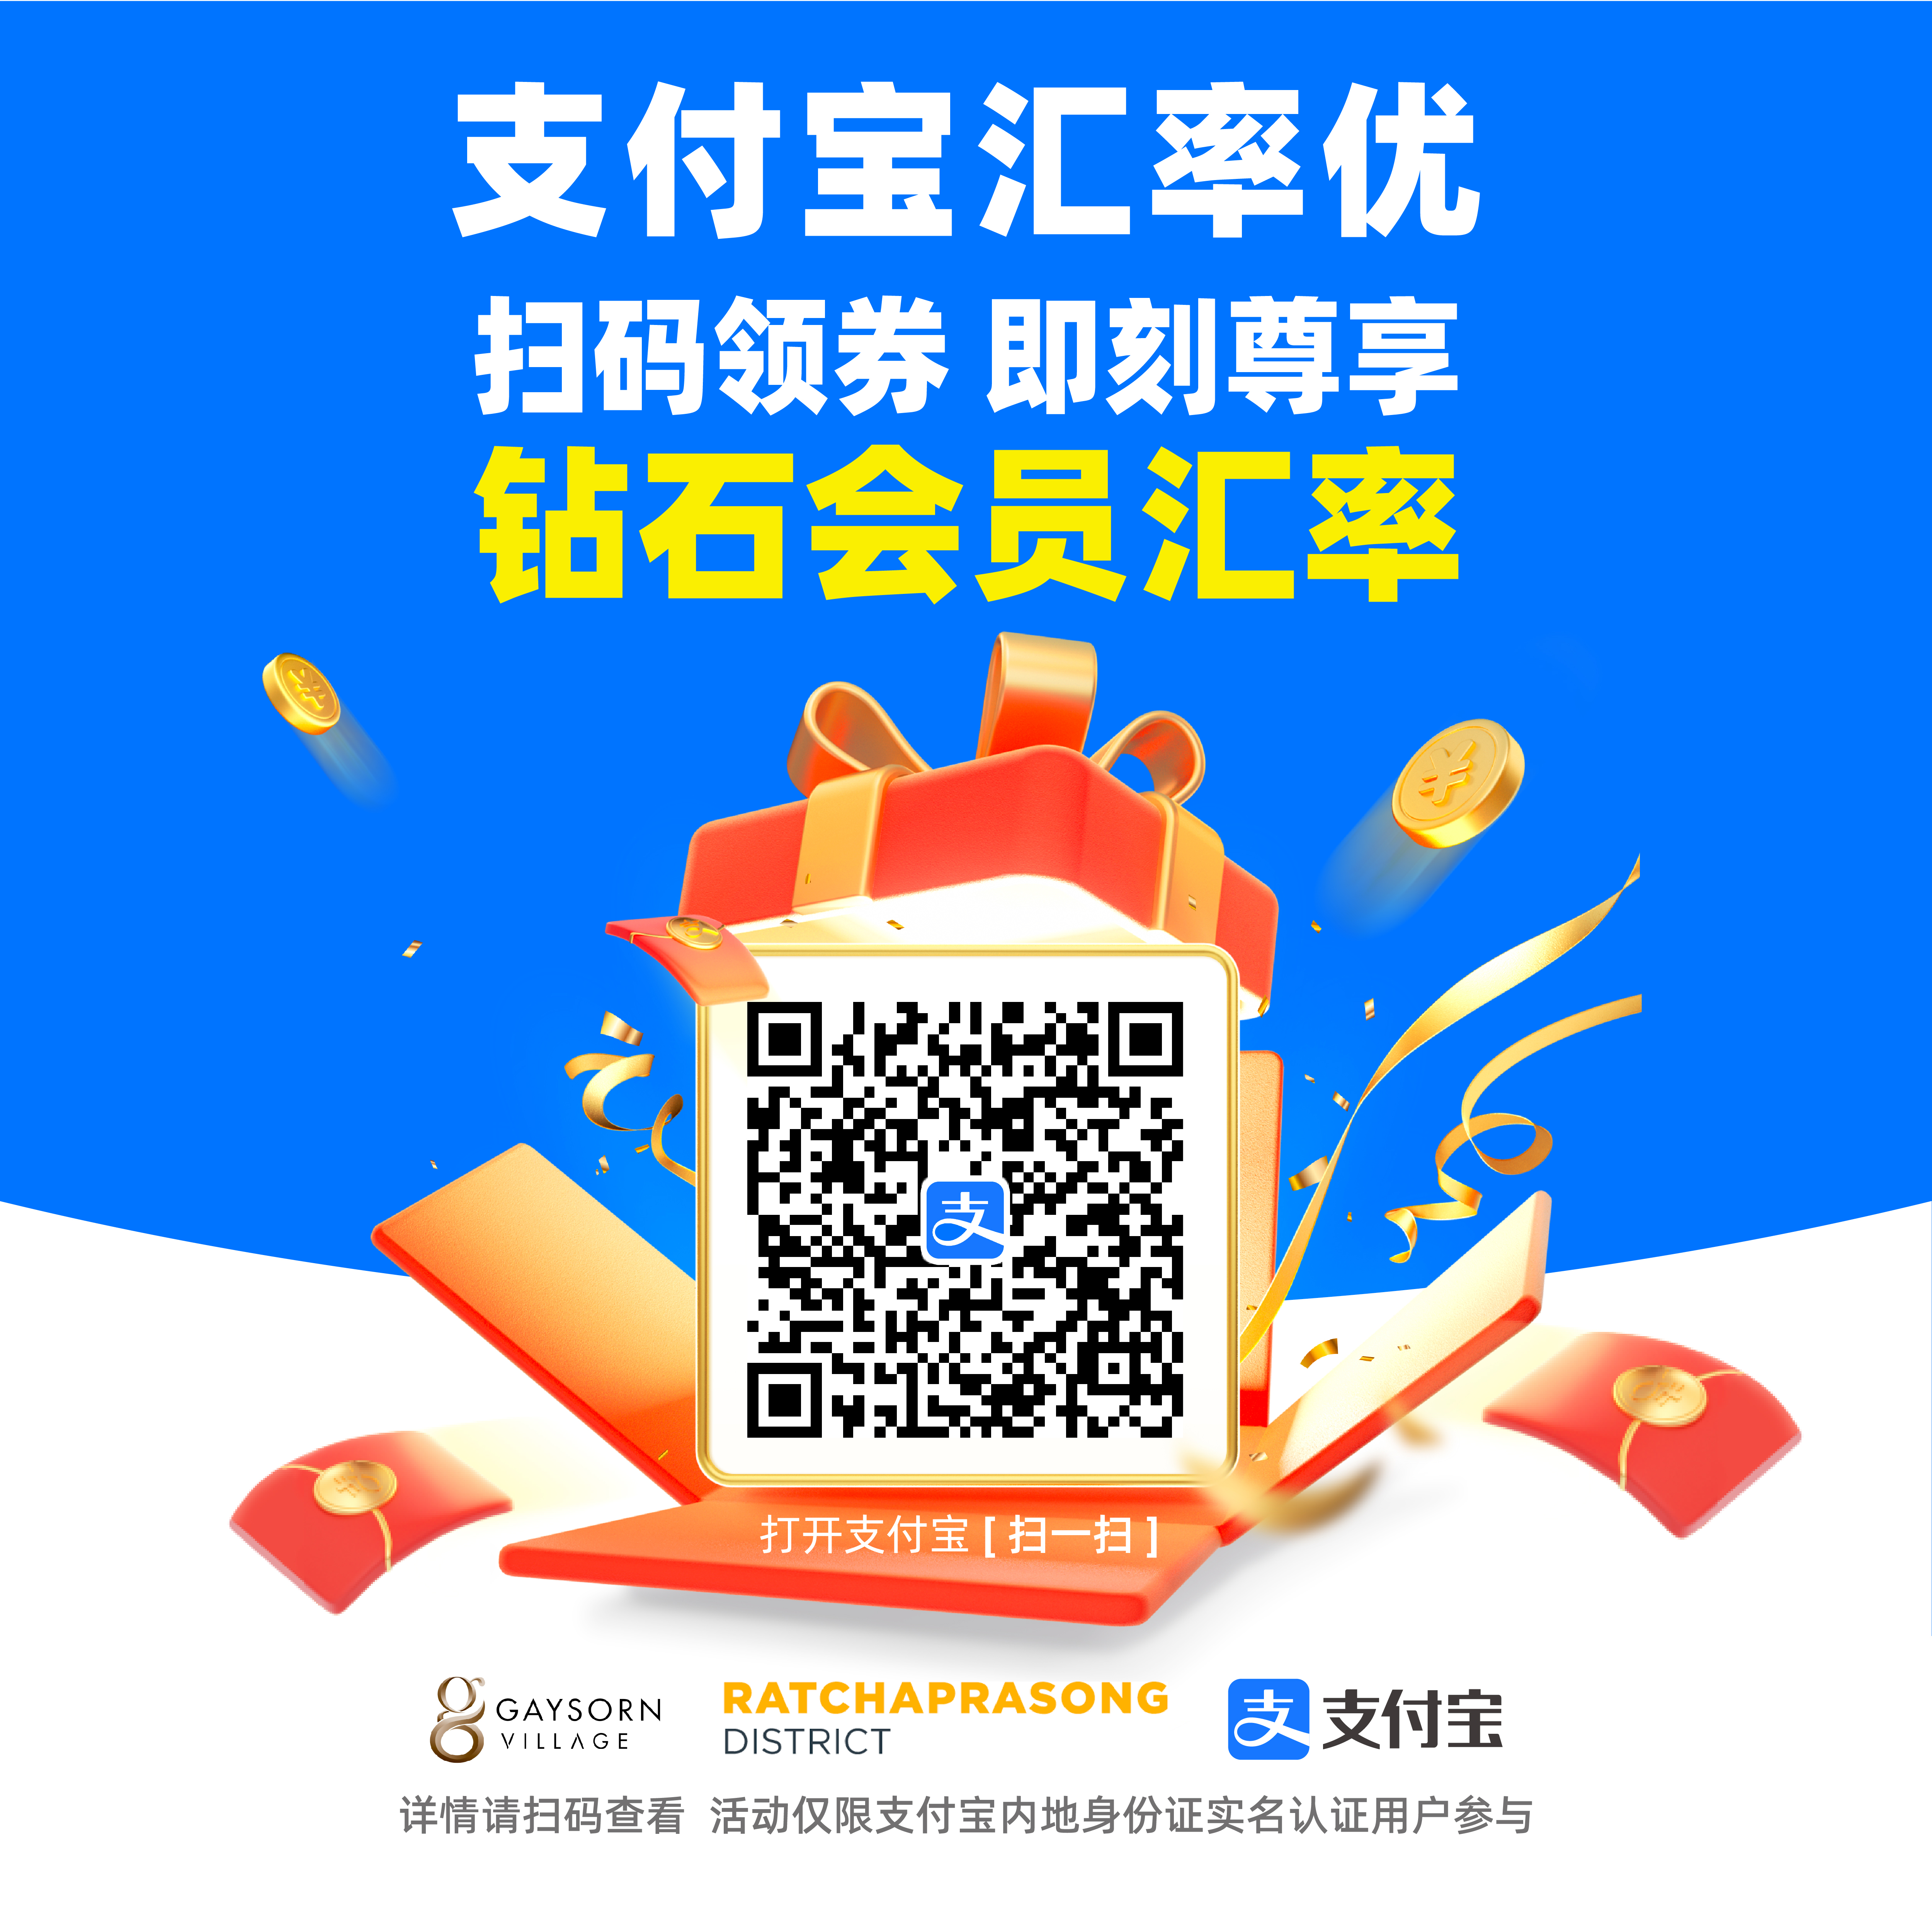 Exclusive Privileges for Alipay Users!